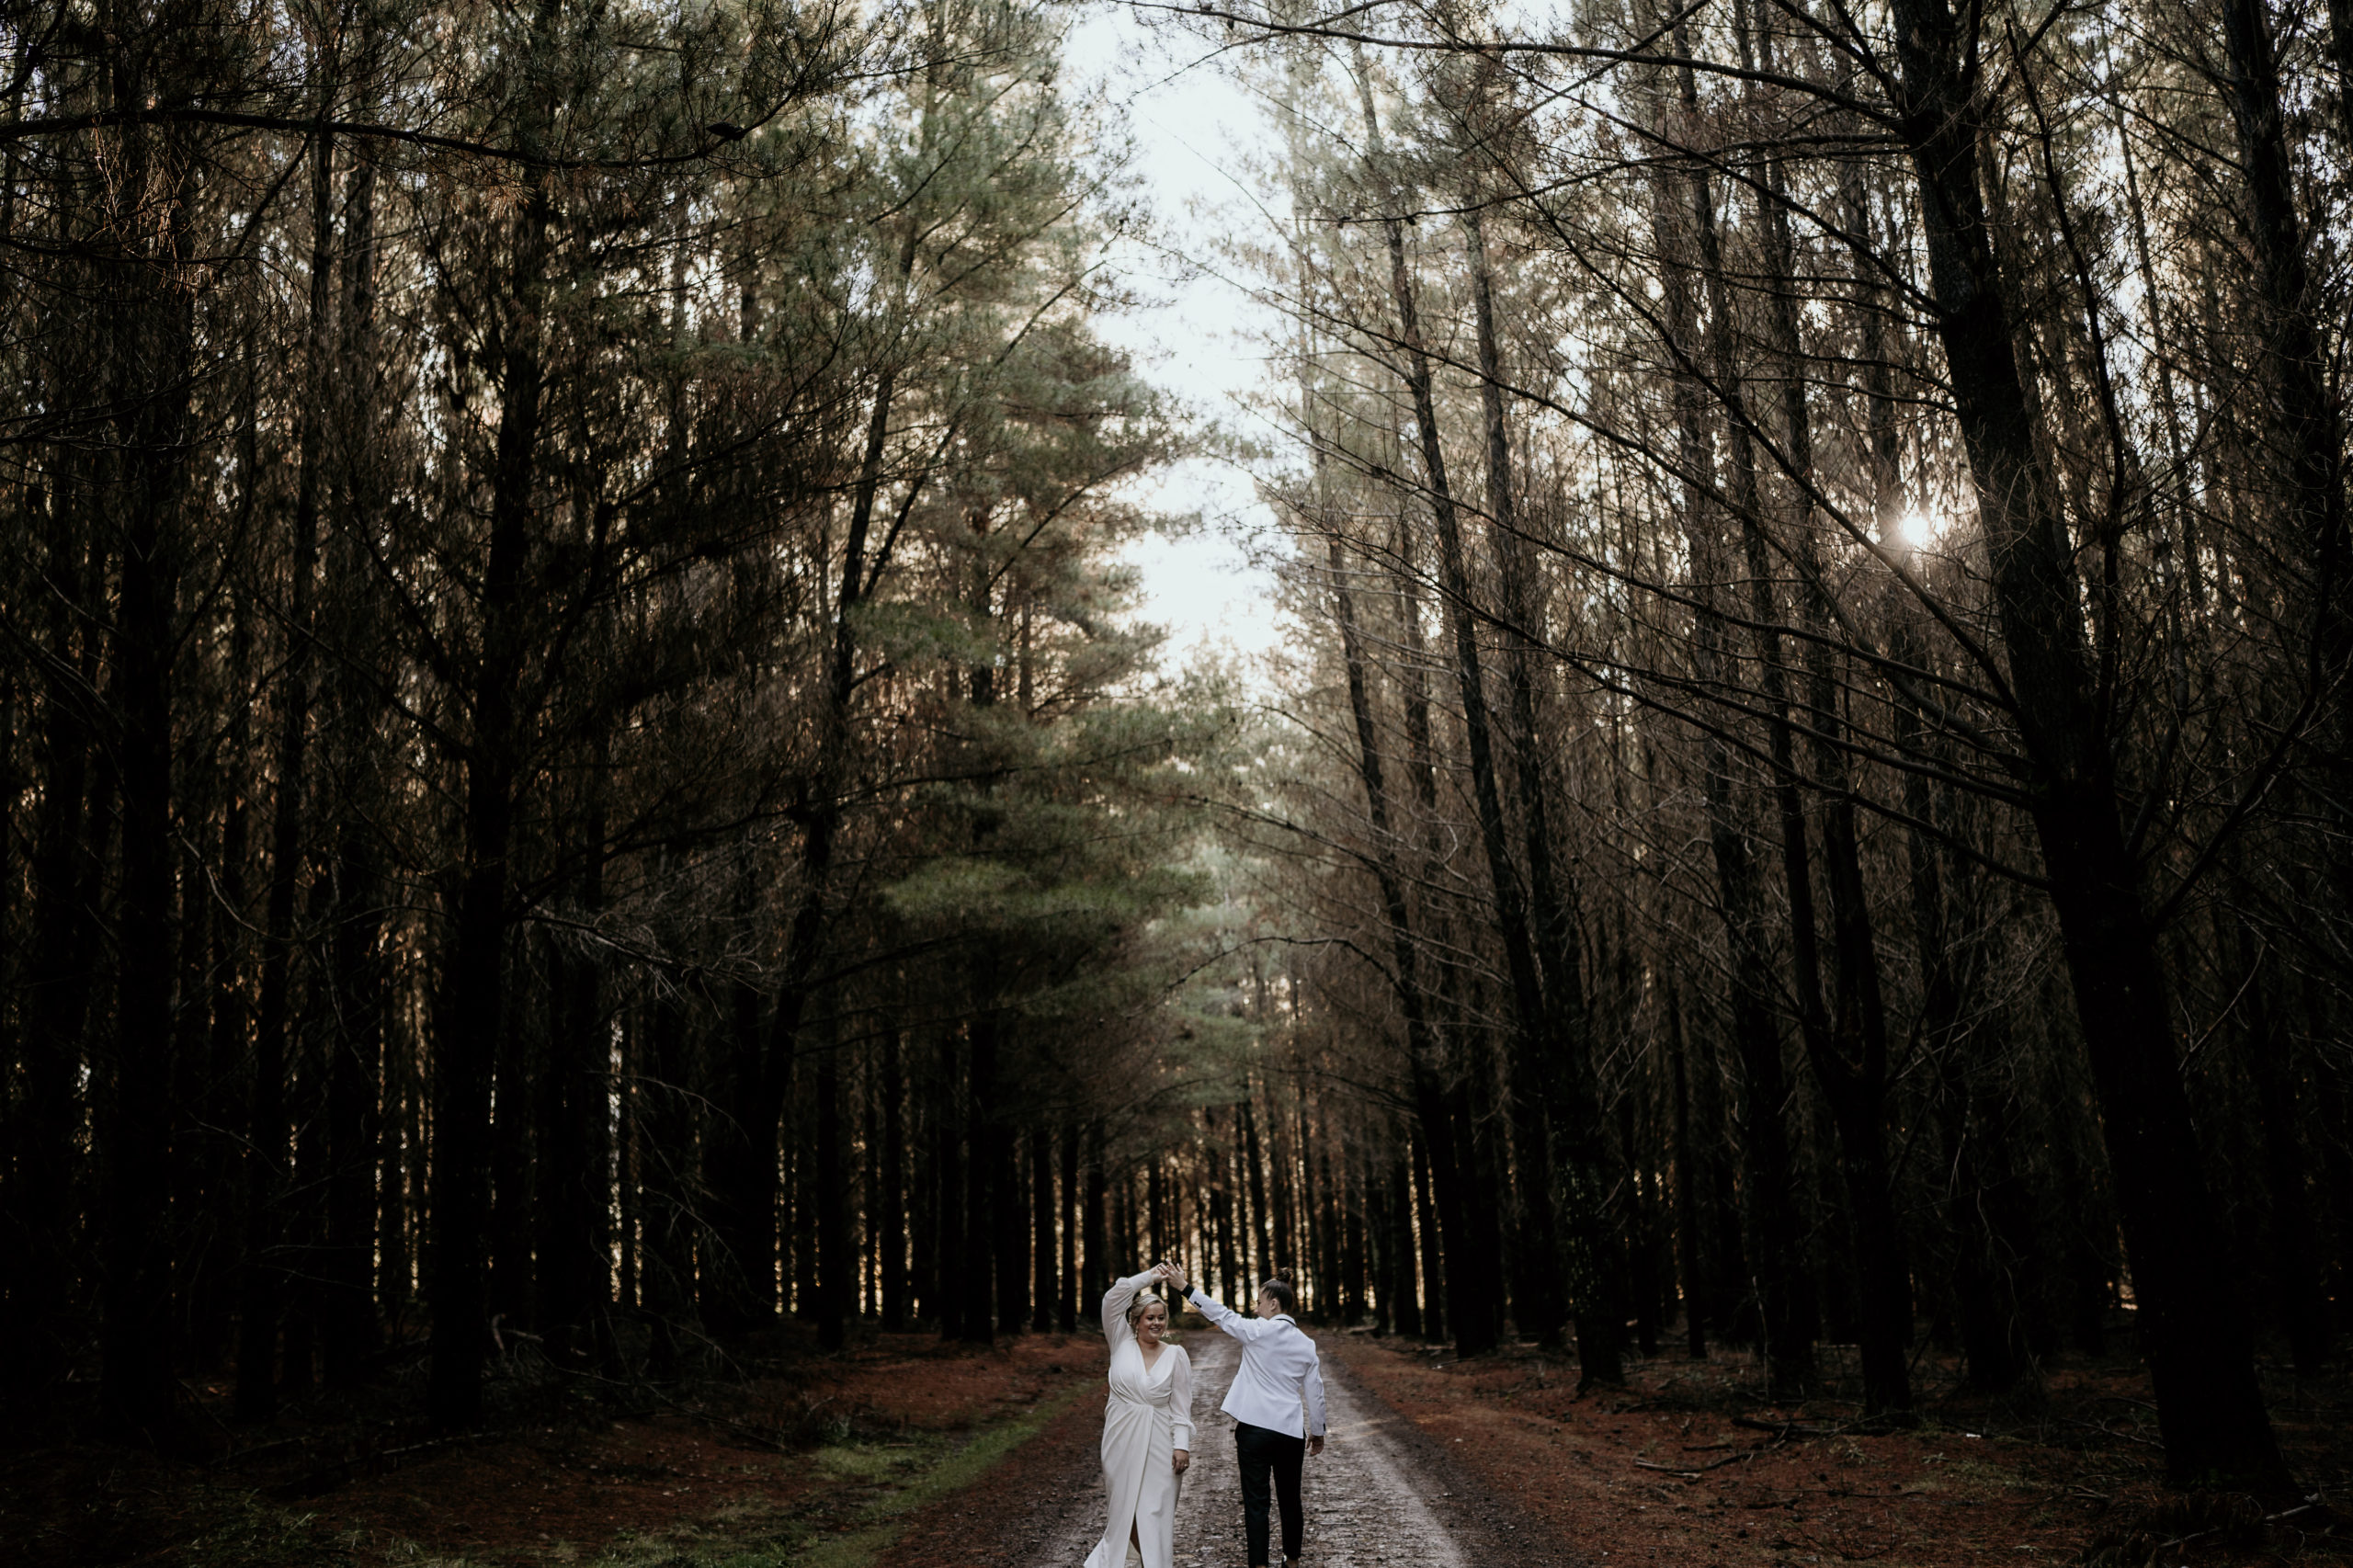 Both brides are dancing in a row of trees in the pine forest out in Orange during their intimate wedding film